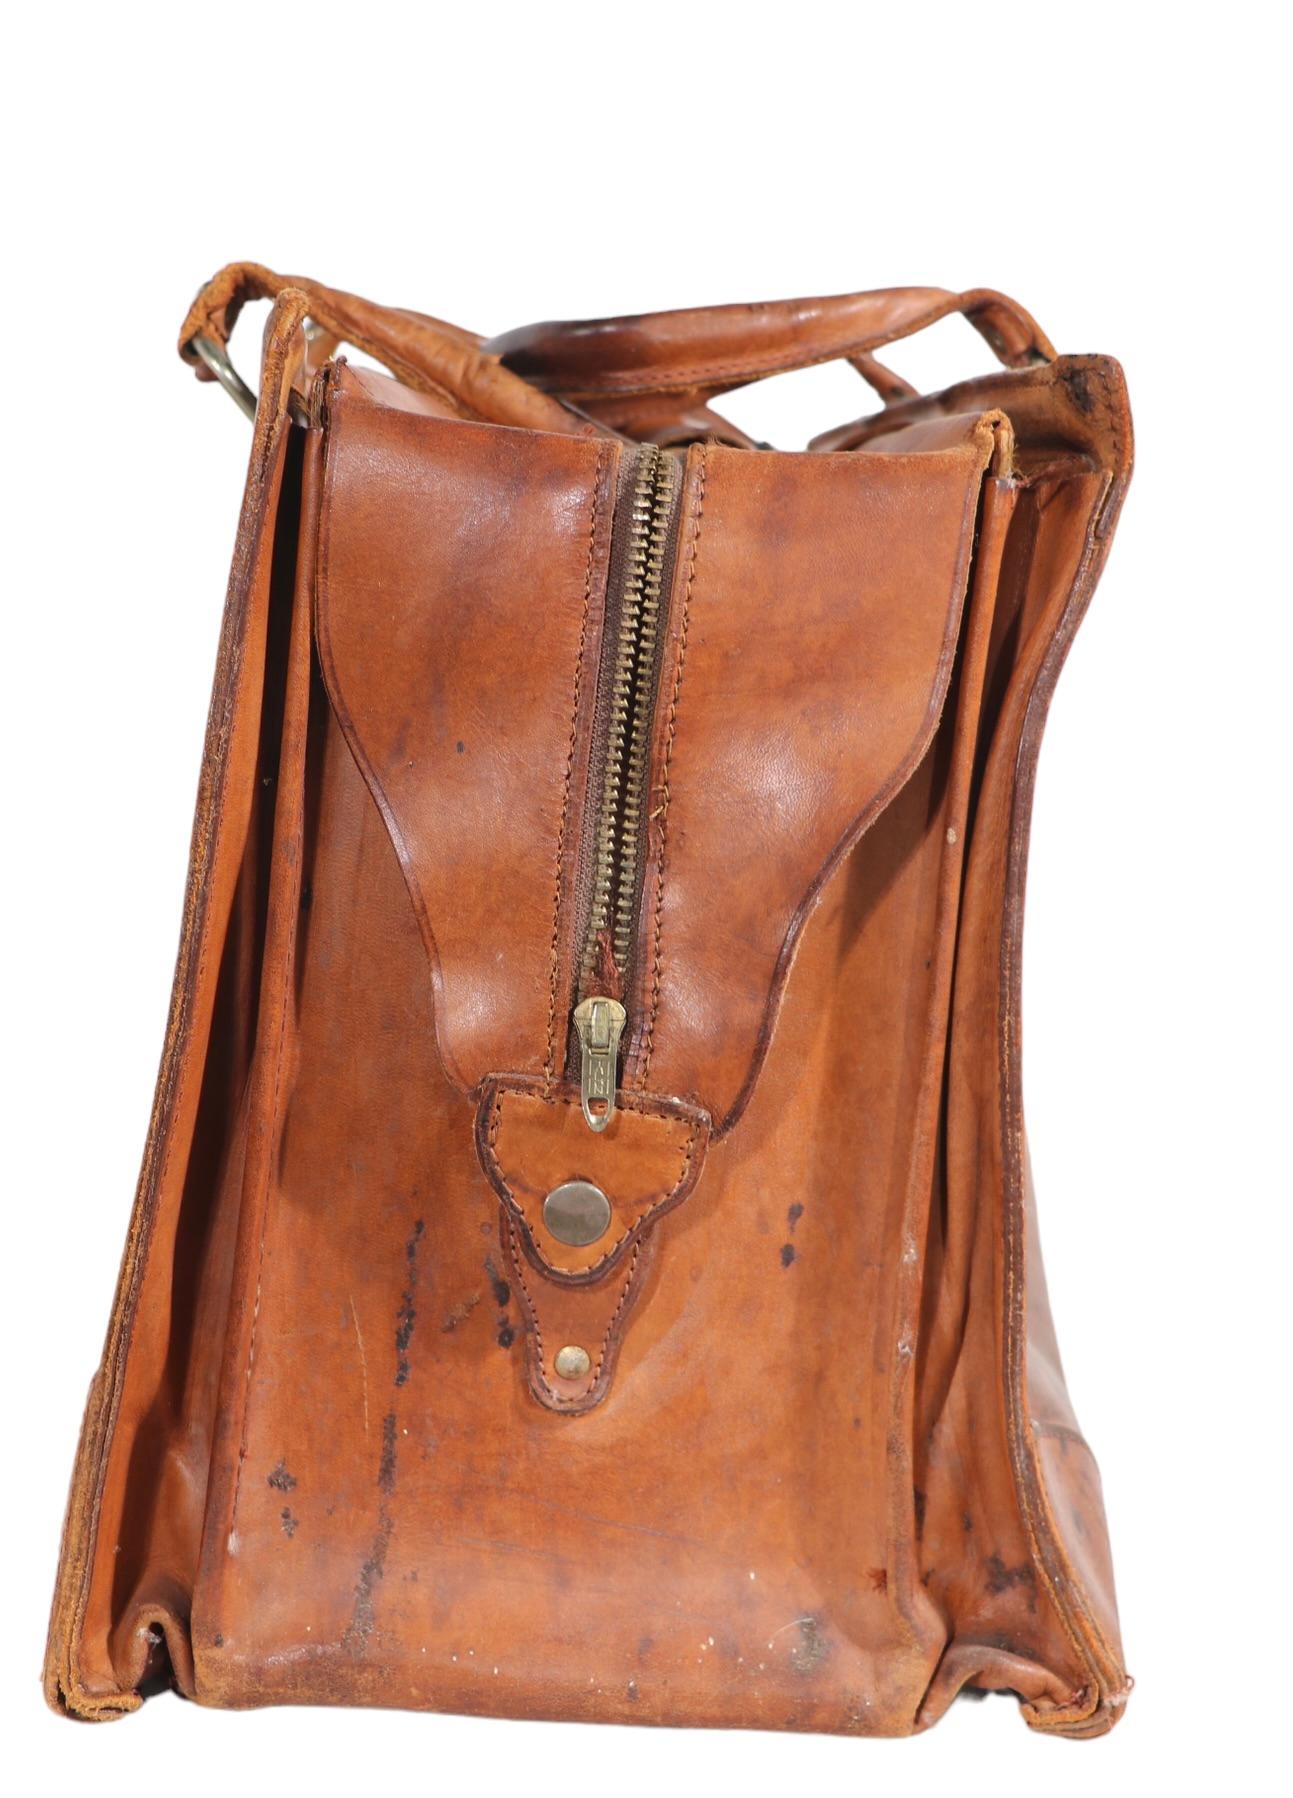 Great vintage hand bag, small suitcase, or document bag etc. The bag features three compartments, two small side pockets, and the main center space, which  can be zipped closed. The handles have a velcro closure, and padded leather grip, the top can